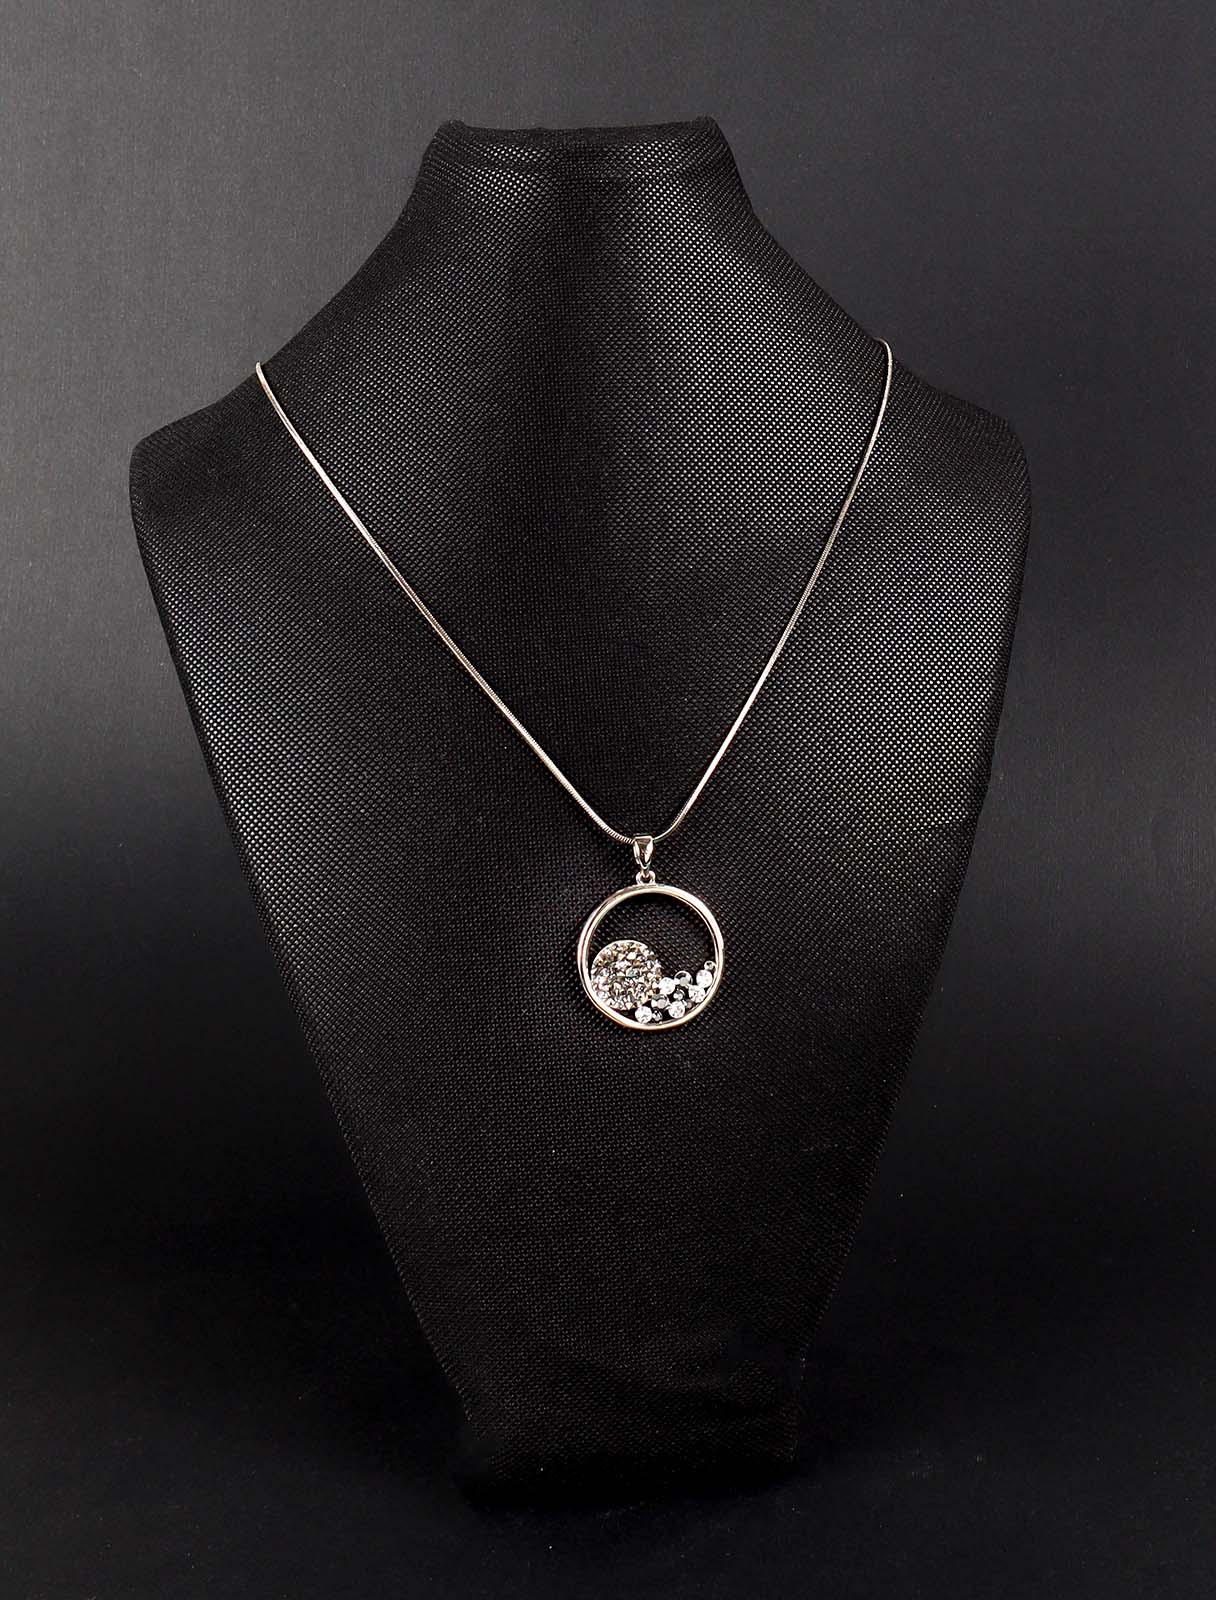 Round pendant necklace decorated with crystal circles